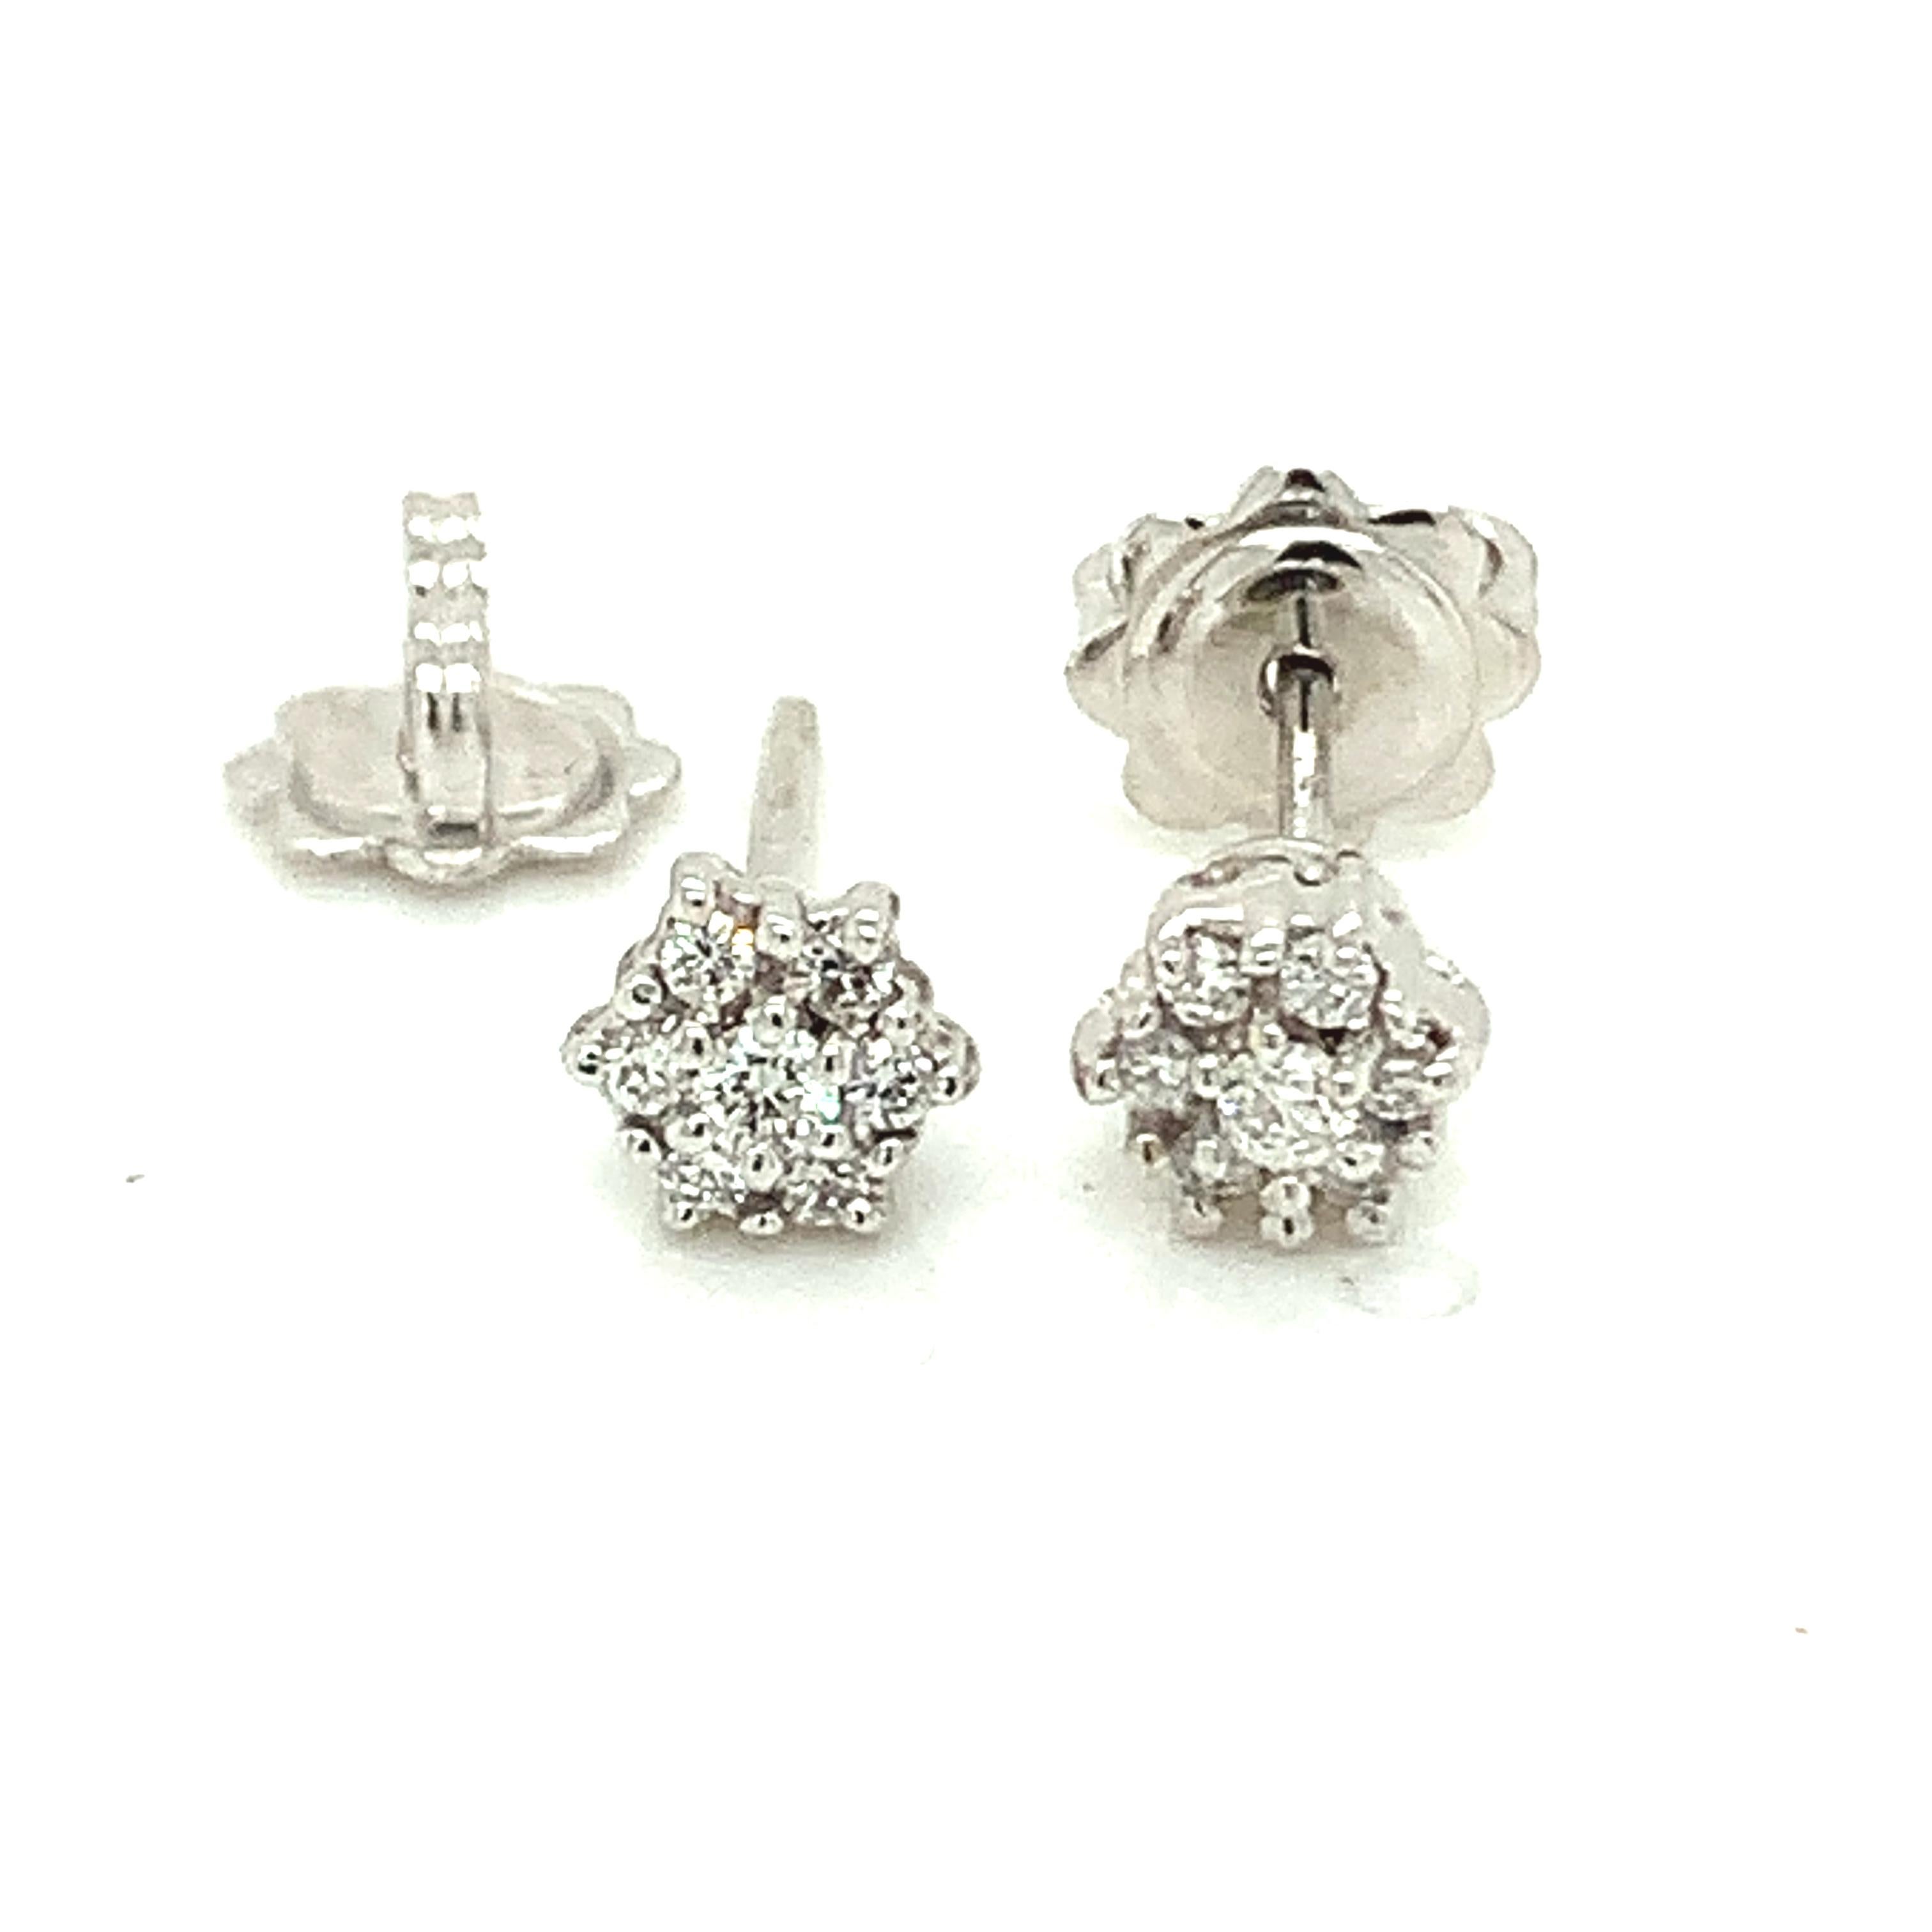 Garavelli classic small studs, in white gold 18 kt with white diamonds.
Earrings size 7 mm
GOLD grs : 2.57
DIAMONDS ct: 0,38
